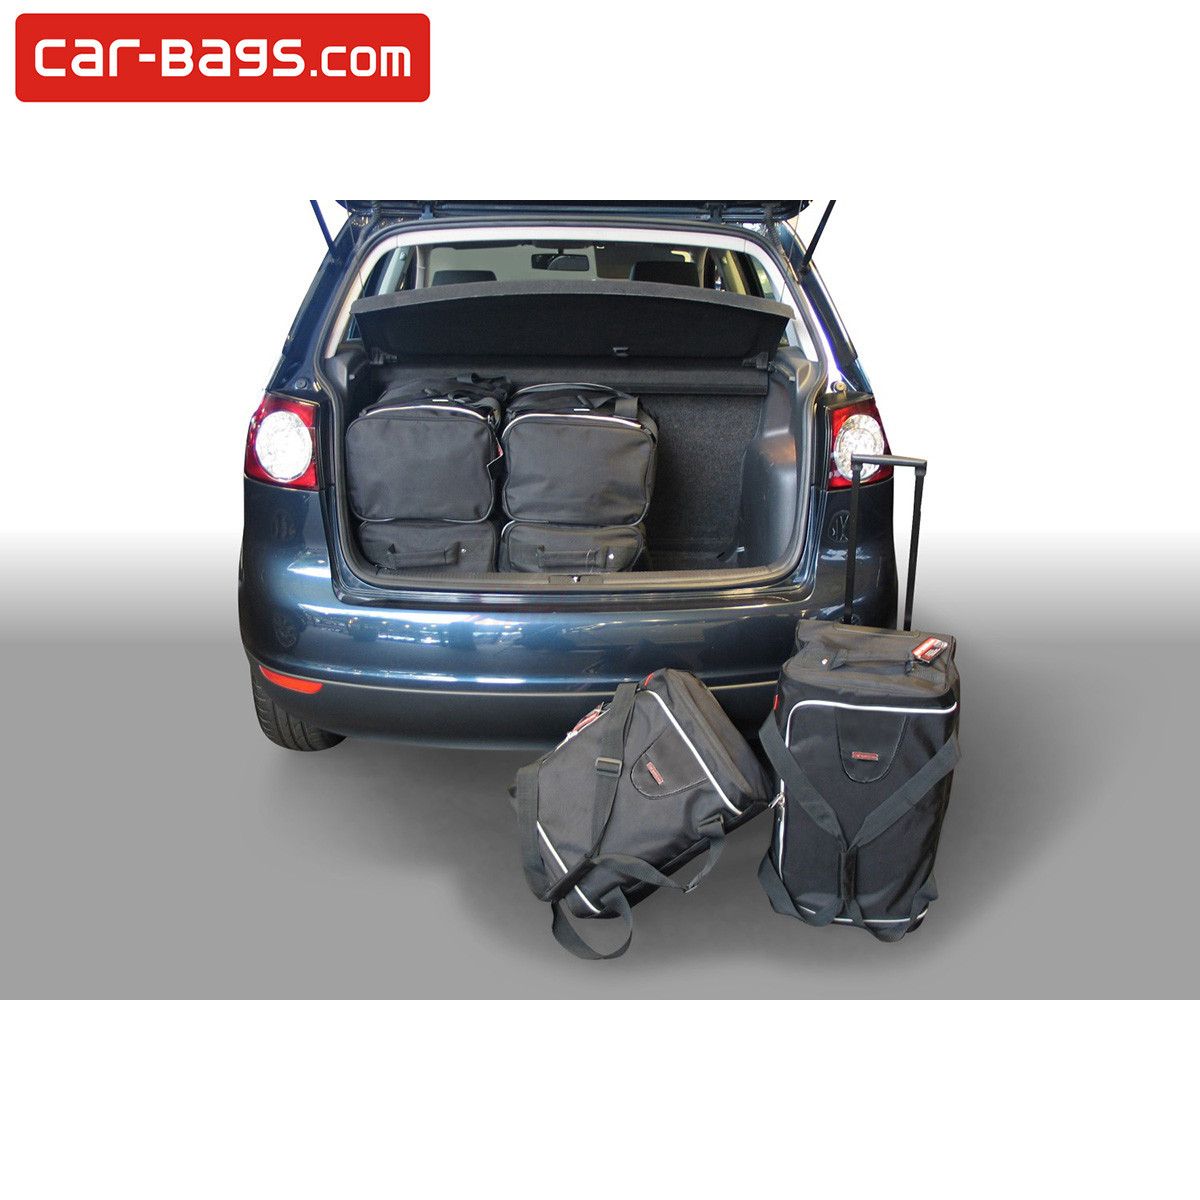 Travel bags fits Volkswagen Golf Plus (1KP) tailor made (6 bags), Time and  space saving for € 379, Perfect fit Car Bags